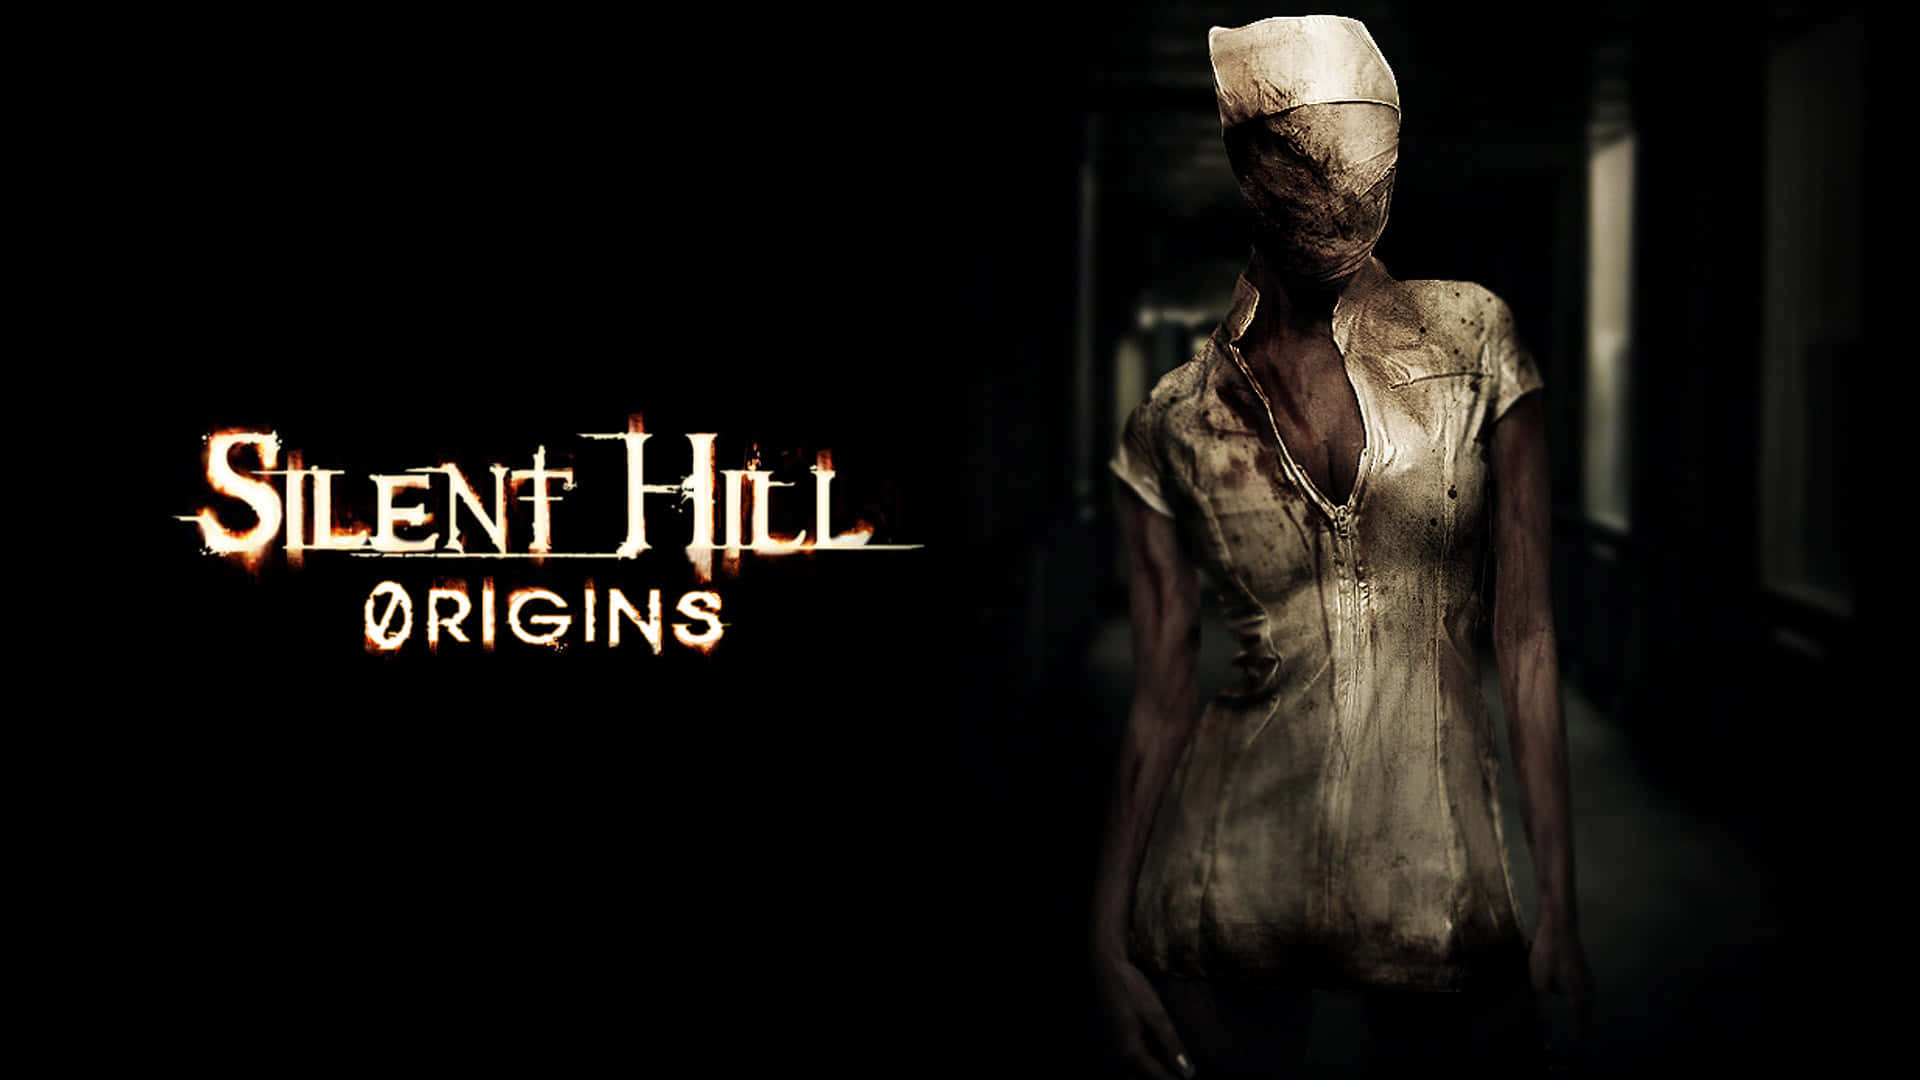 Desolate Town of Silent Hill Reveals Scary Secrets